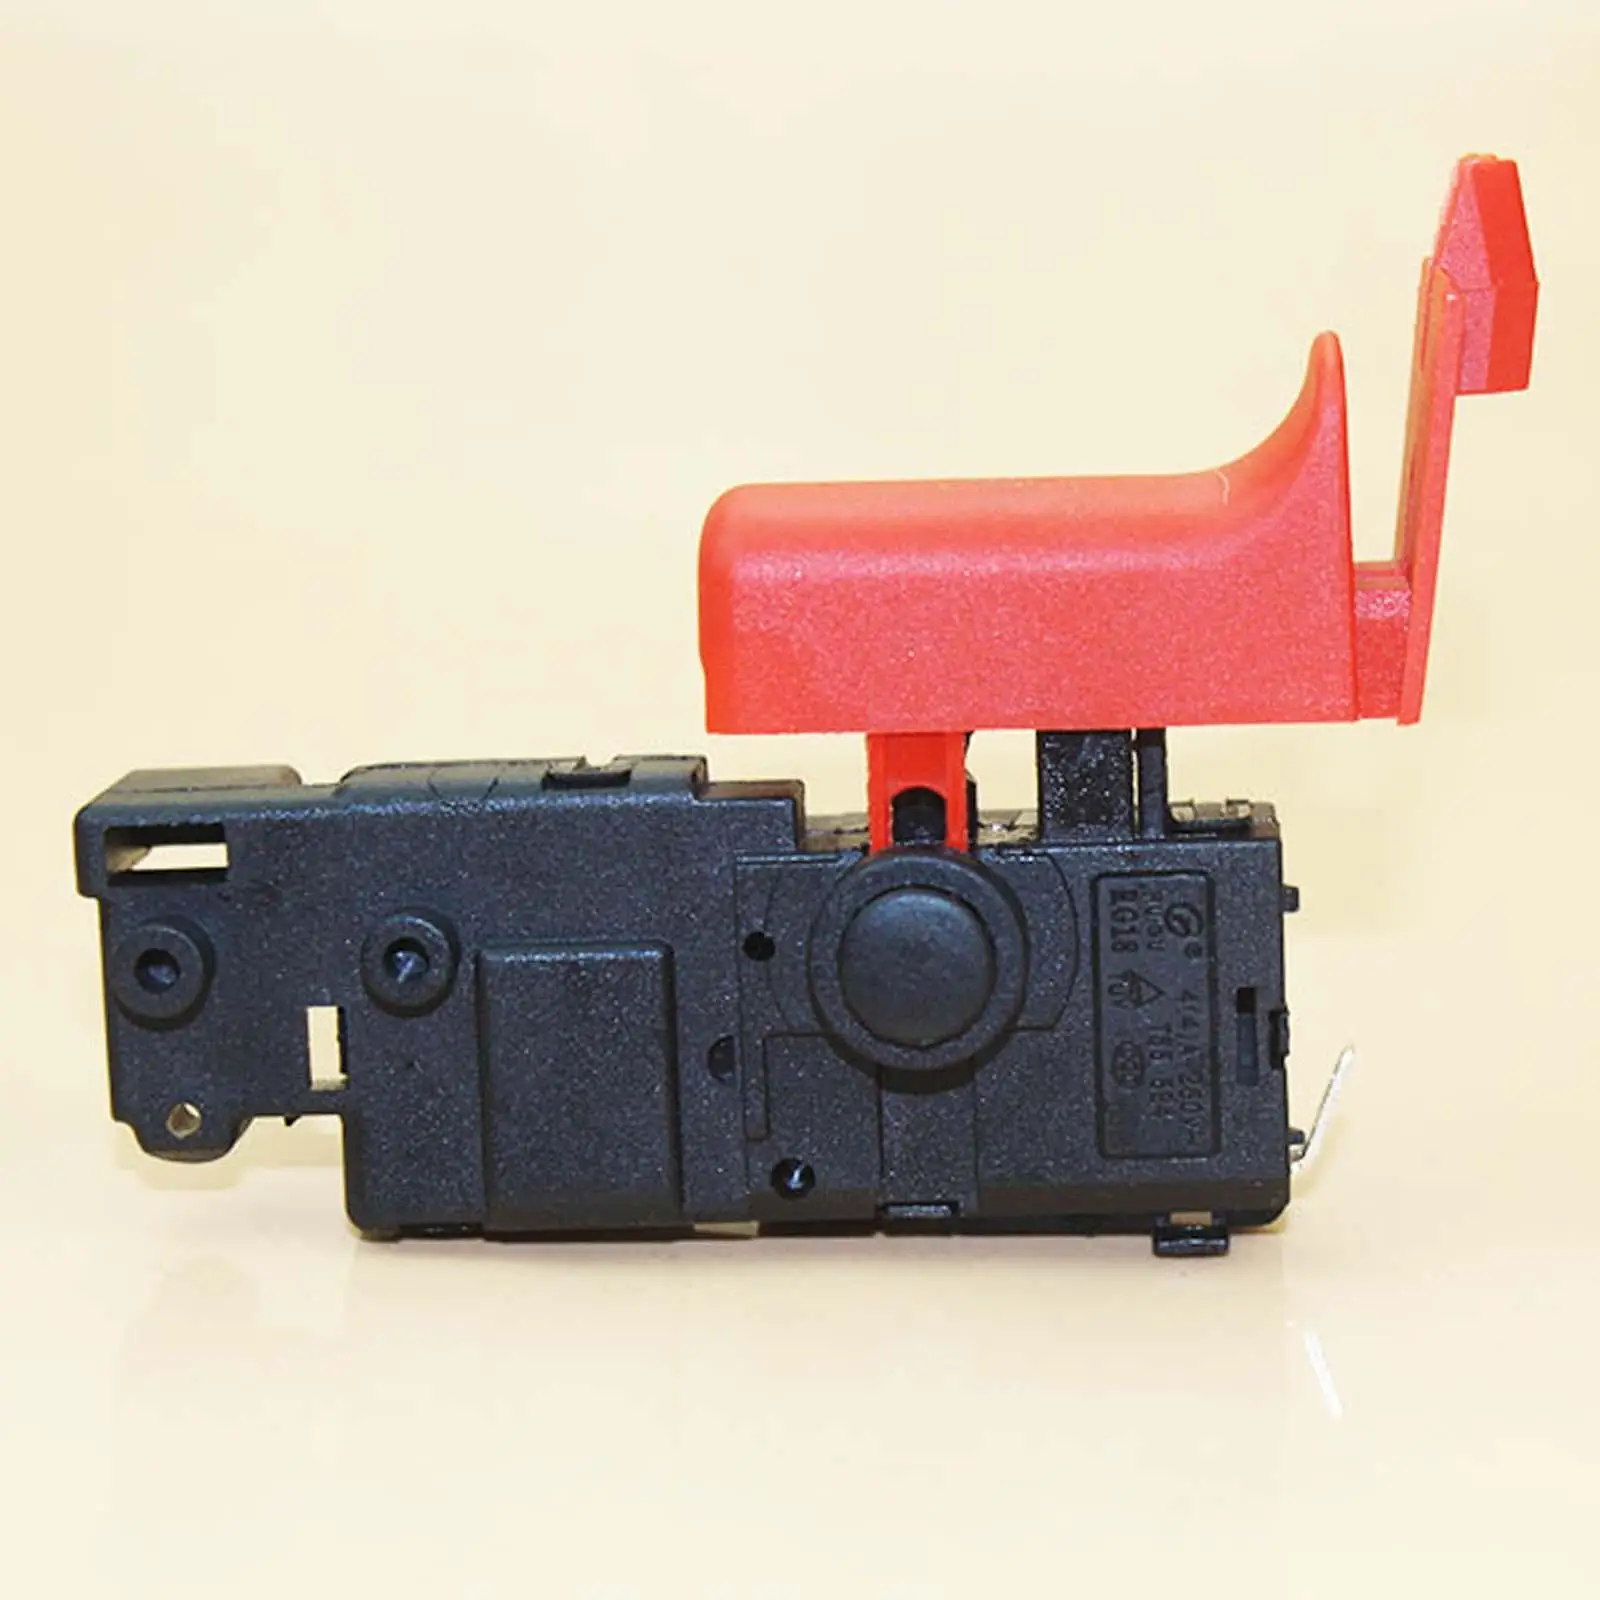 Rotory Hammer Switch Power Tools Parts Replacement for GBH 2-28 D/22/26